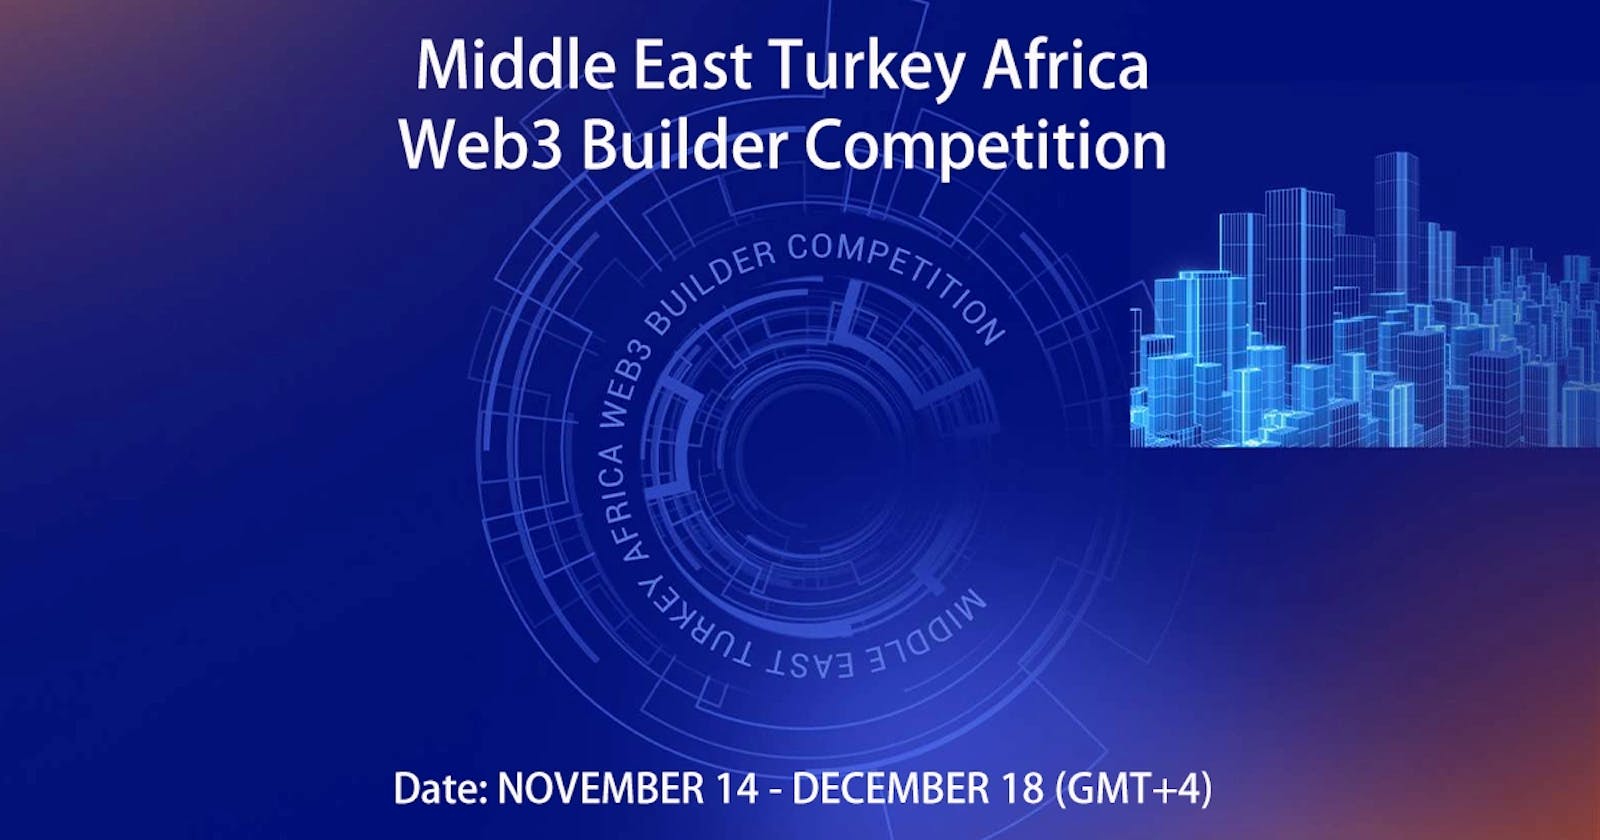 Web3 Builder Competition